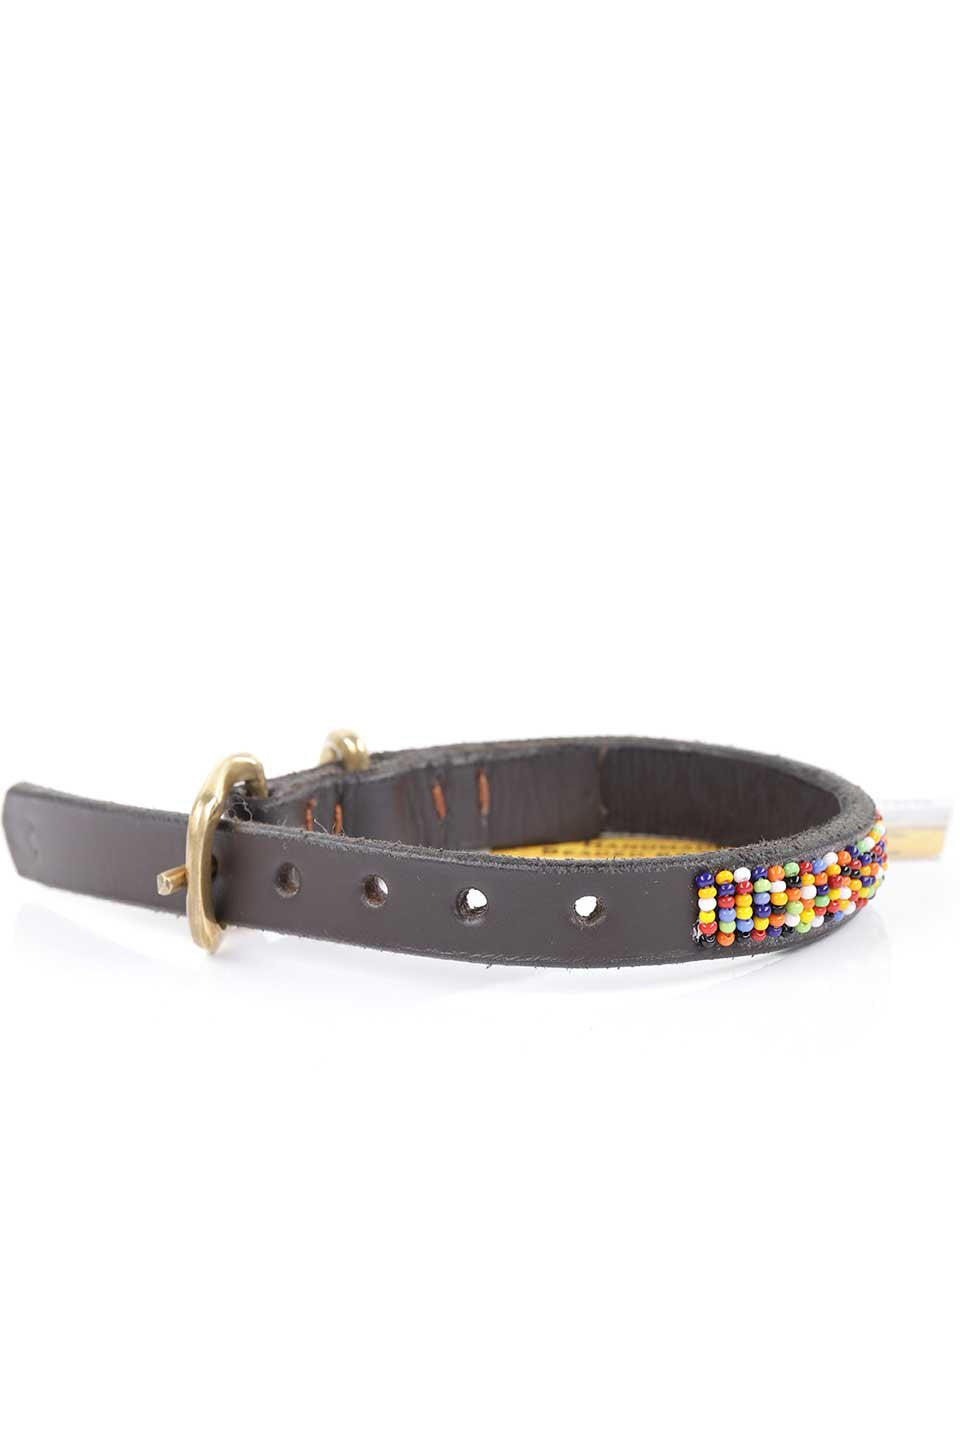 Confetti Beaded Dog Collar 8" コンフェッティ・ビーズドッグカラー / by THE KENYAN COLLECTION